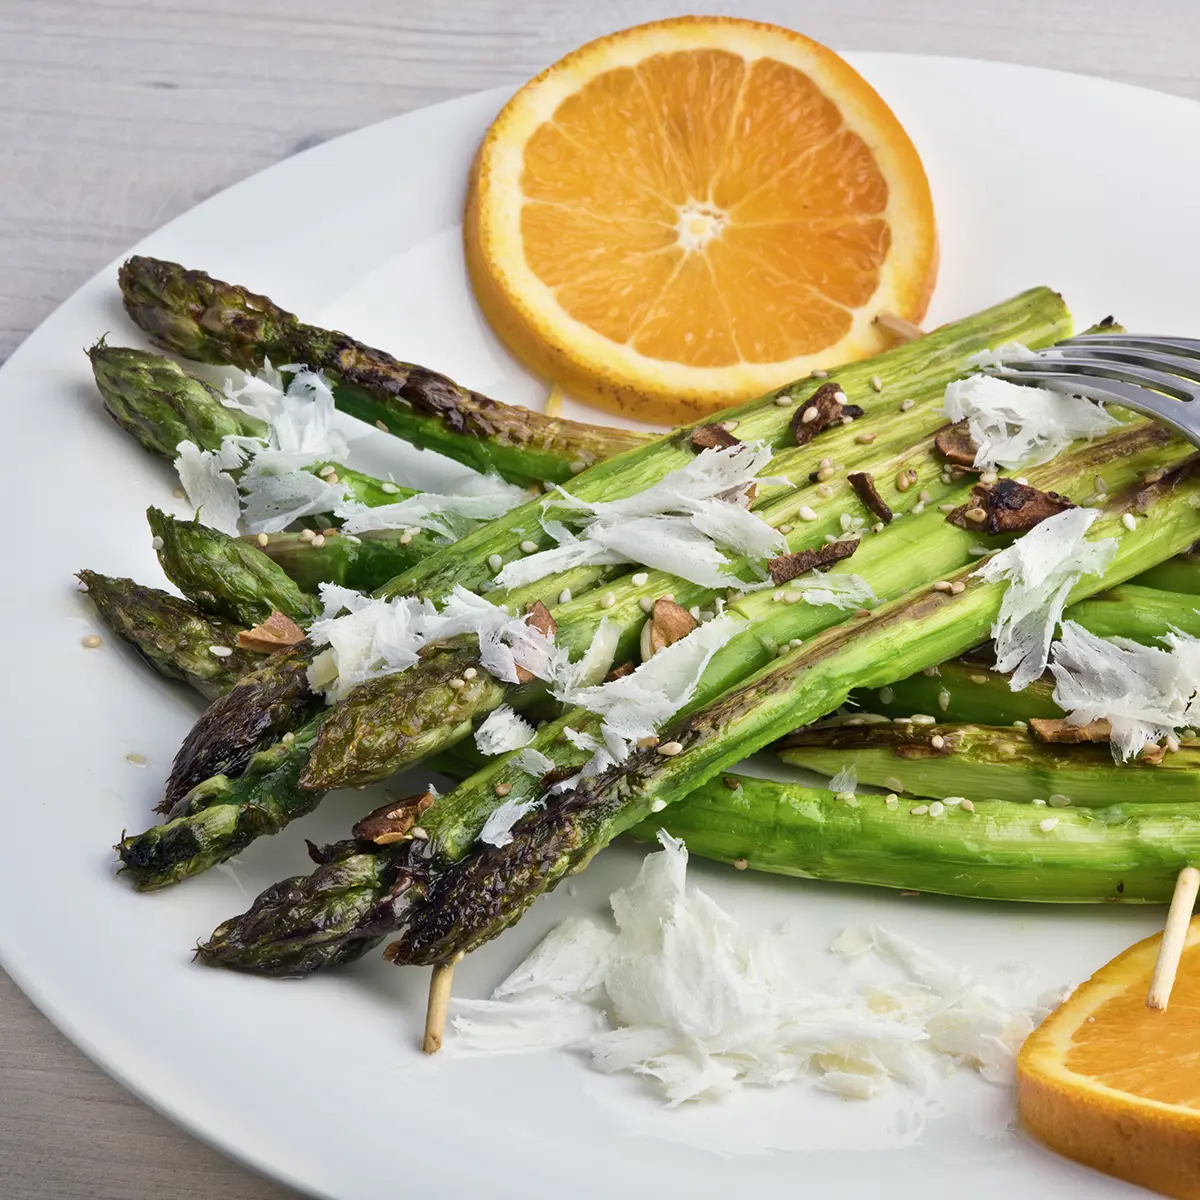 Asparagus grilled with orange